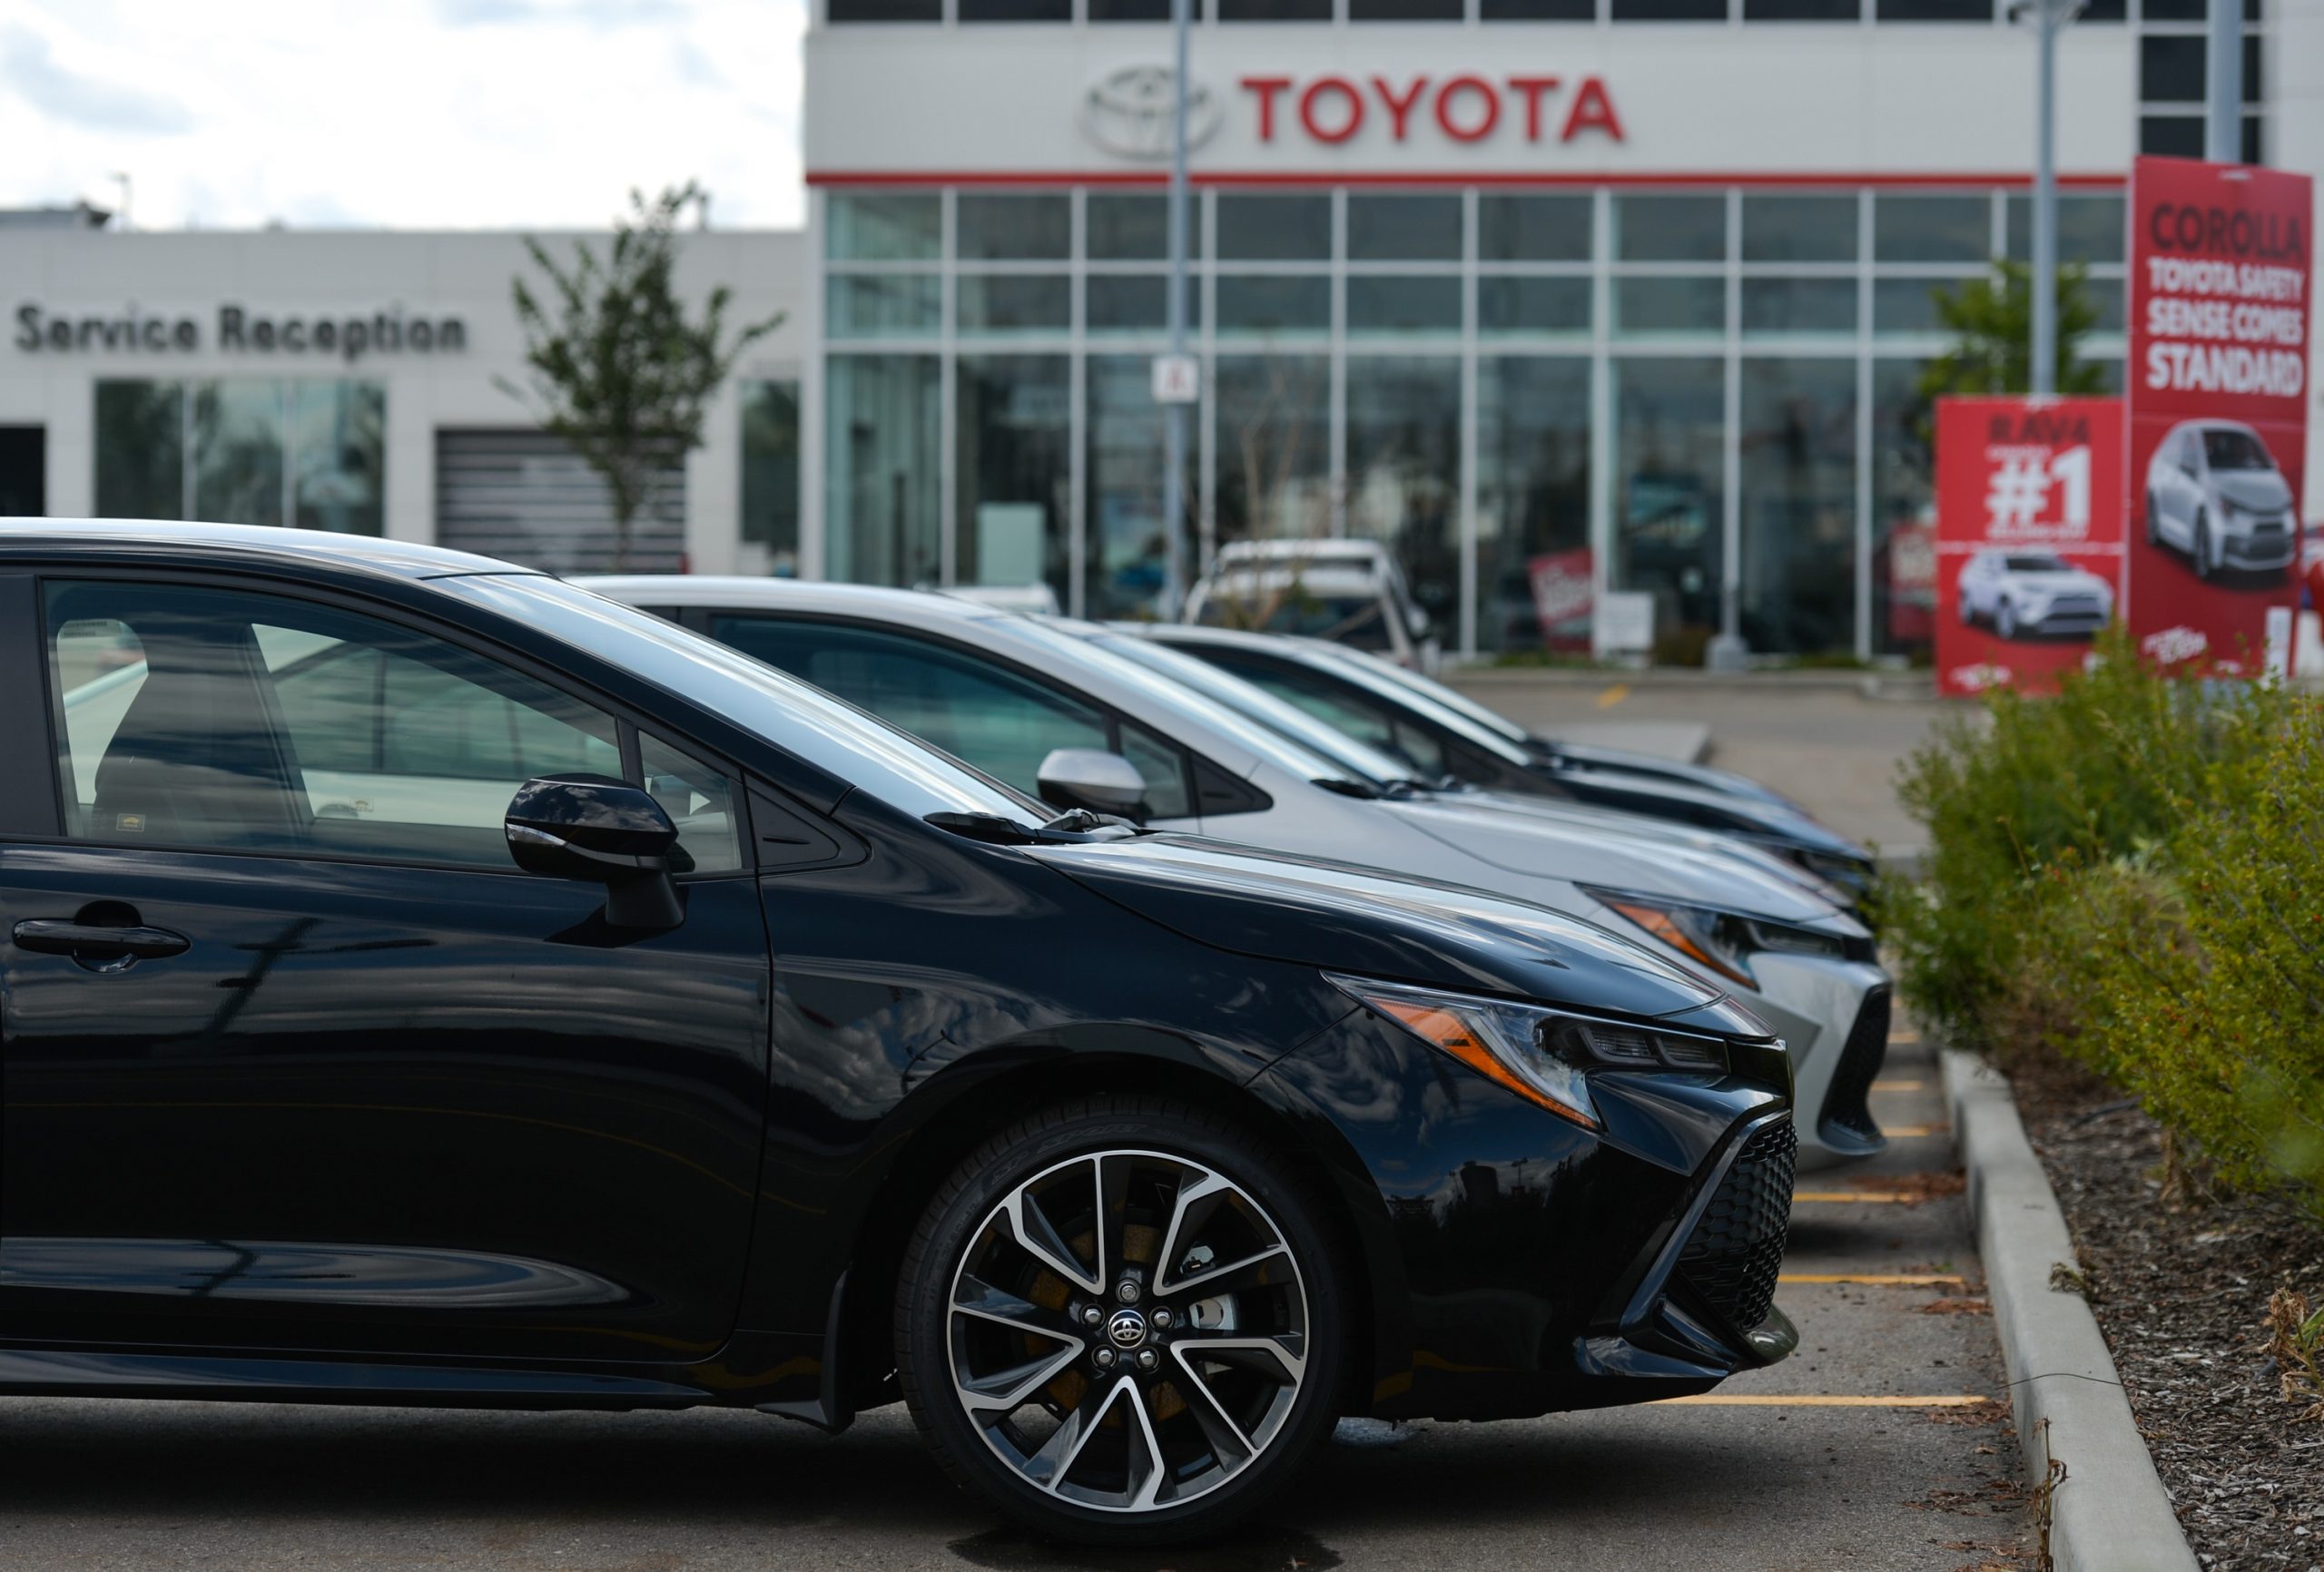 A line of 2022 Toyota Corolla models, shot in profile on a Toyota dealership lot